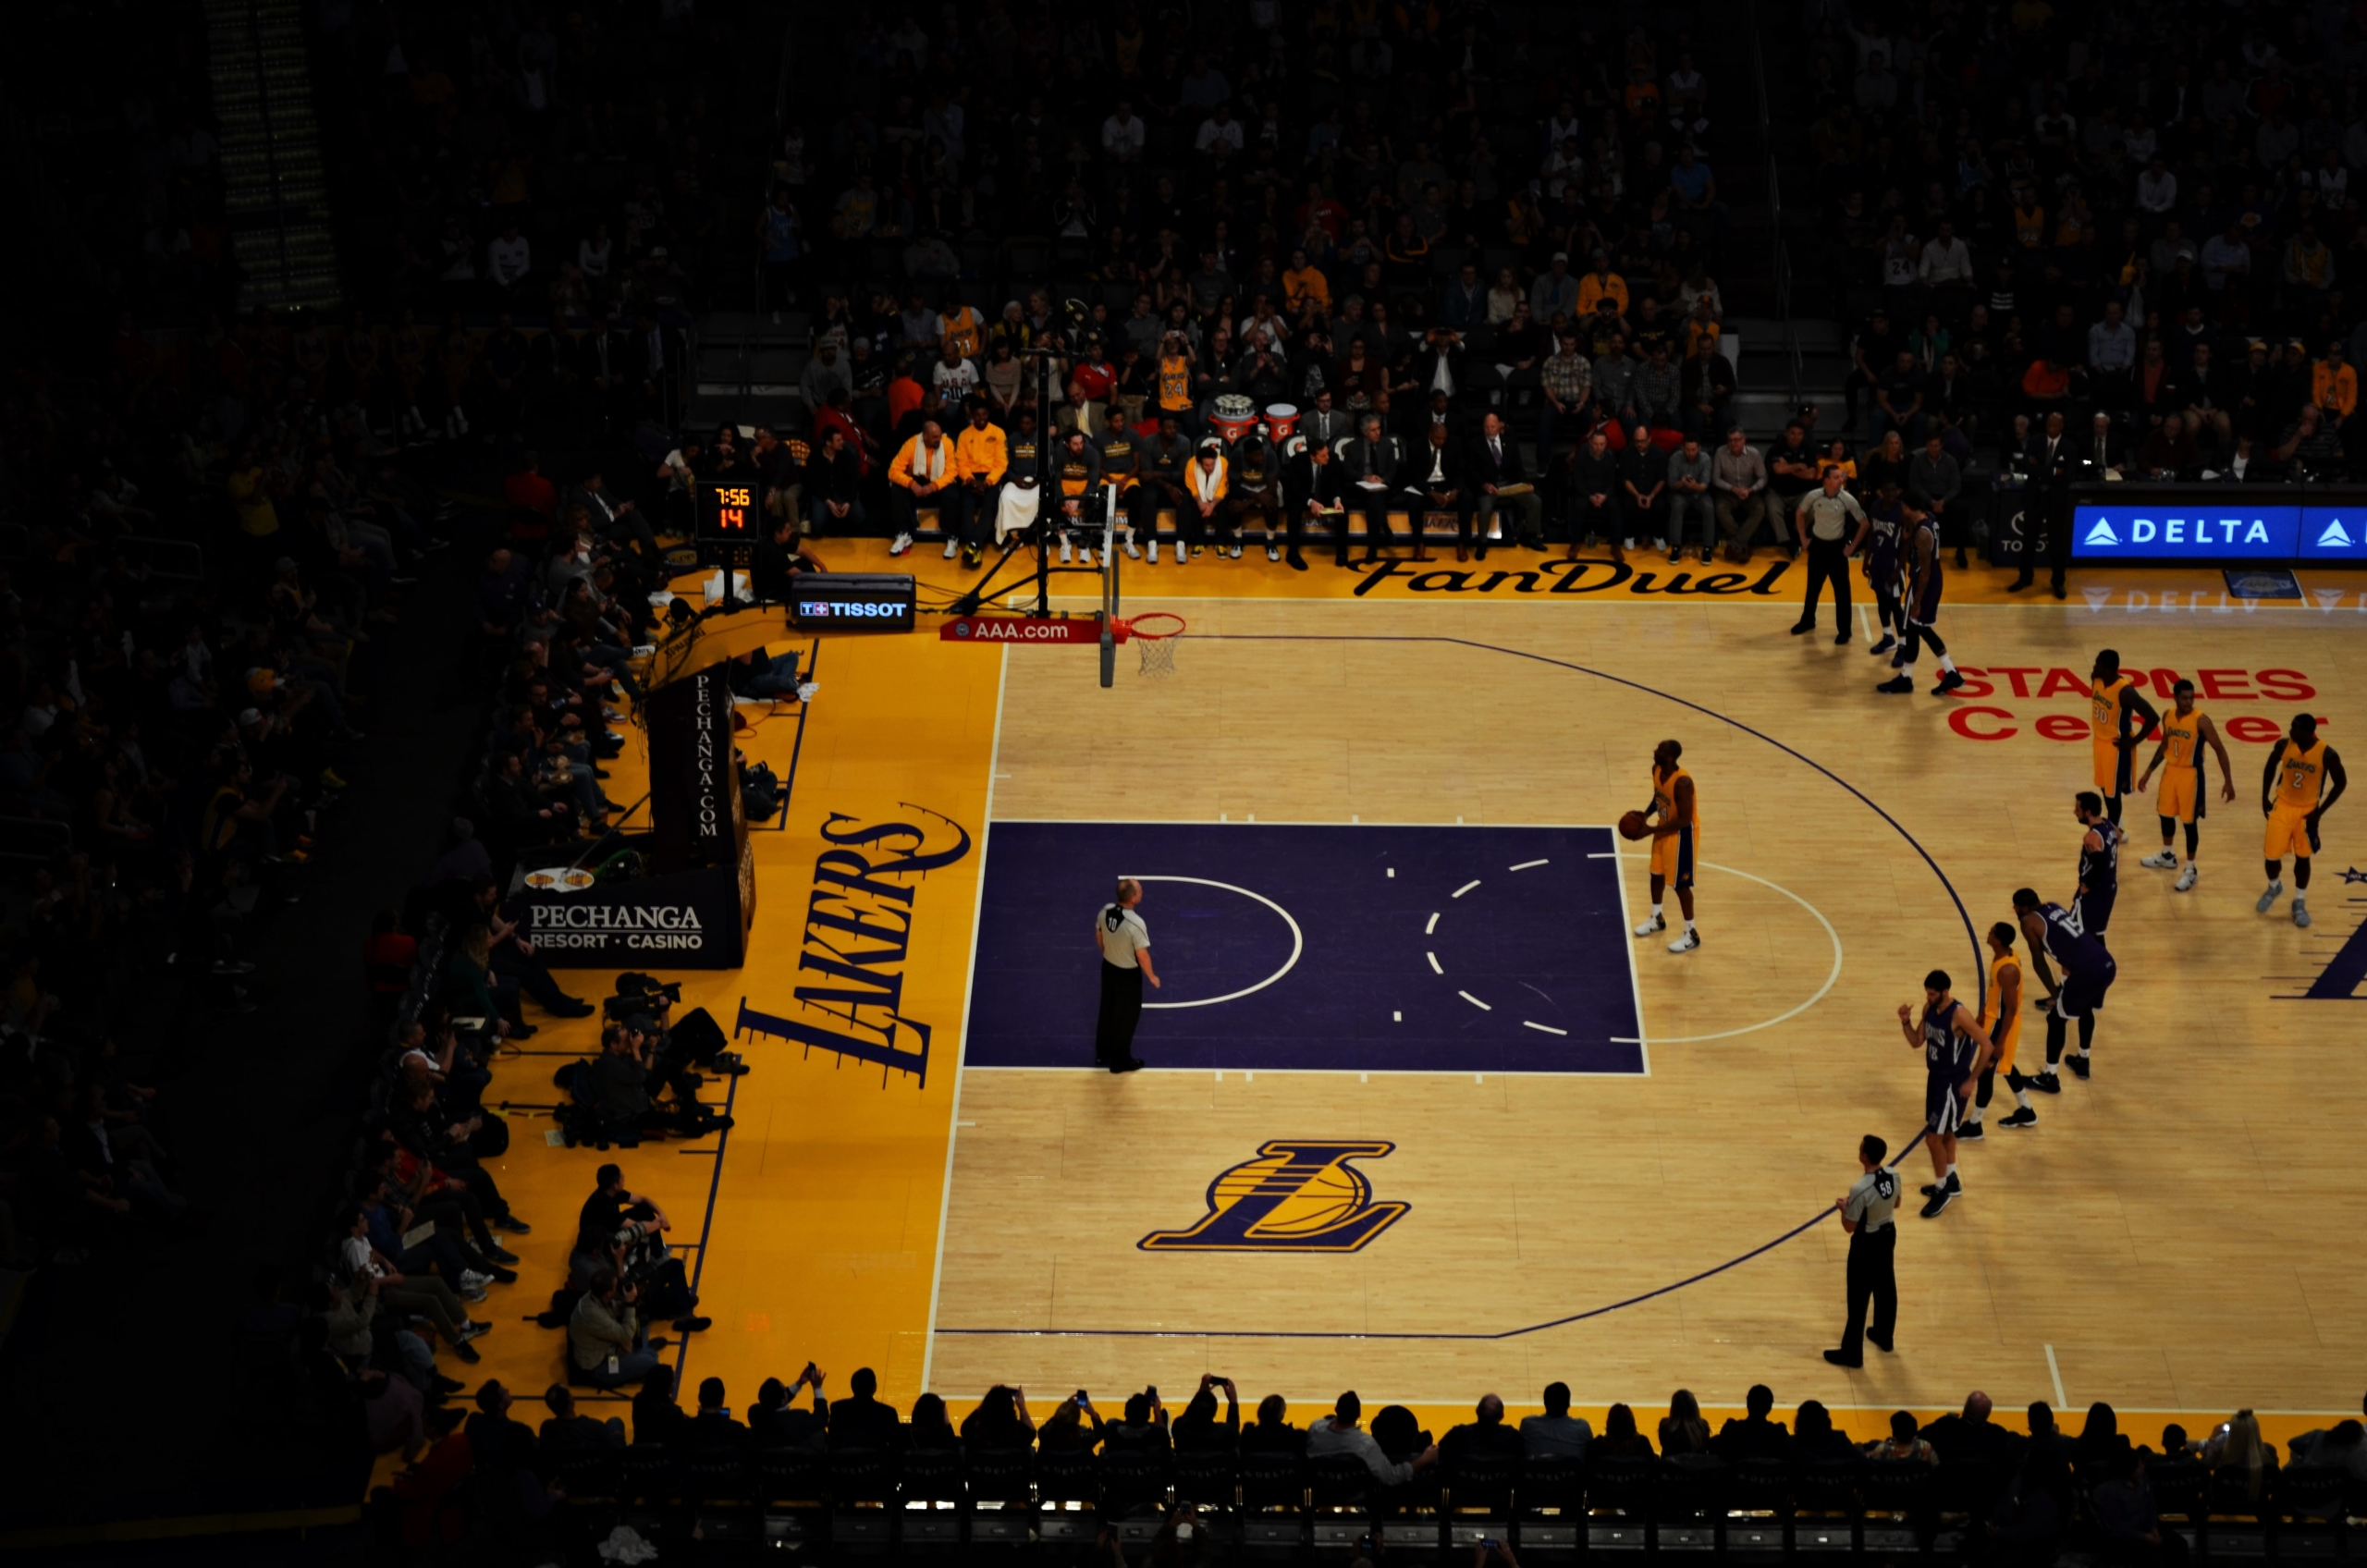 A player for the LA lakers basketball team taking a free-throw